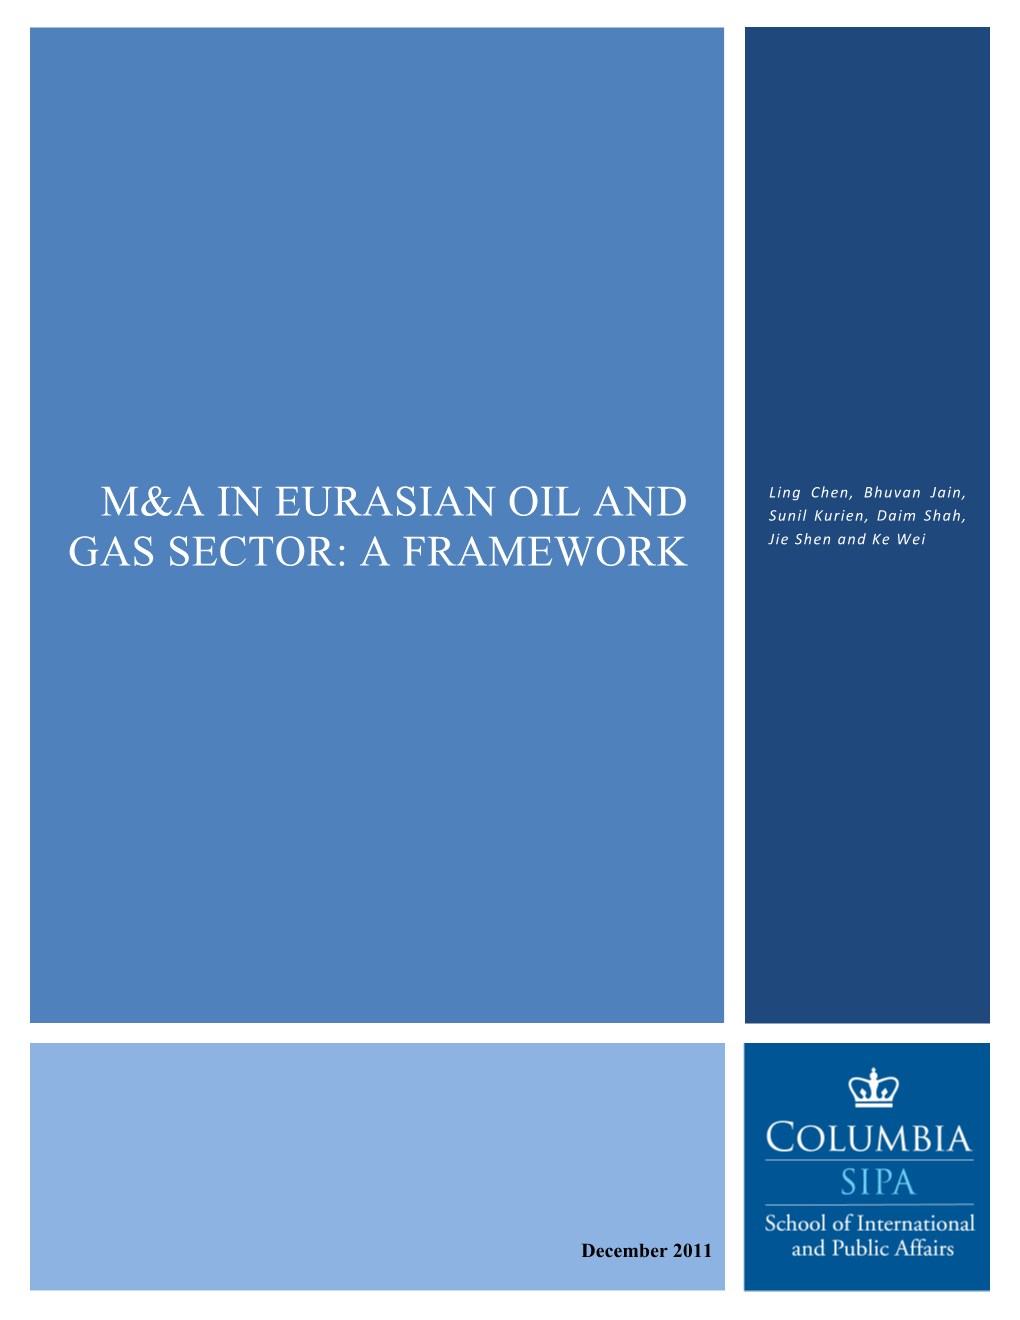 M&A in Eurasian Oil and Gas Sector: a Framework